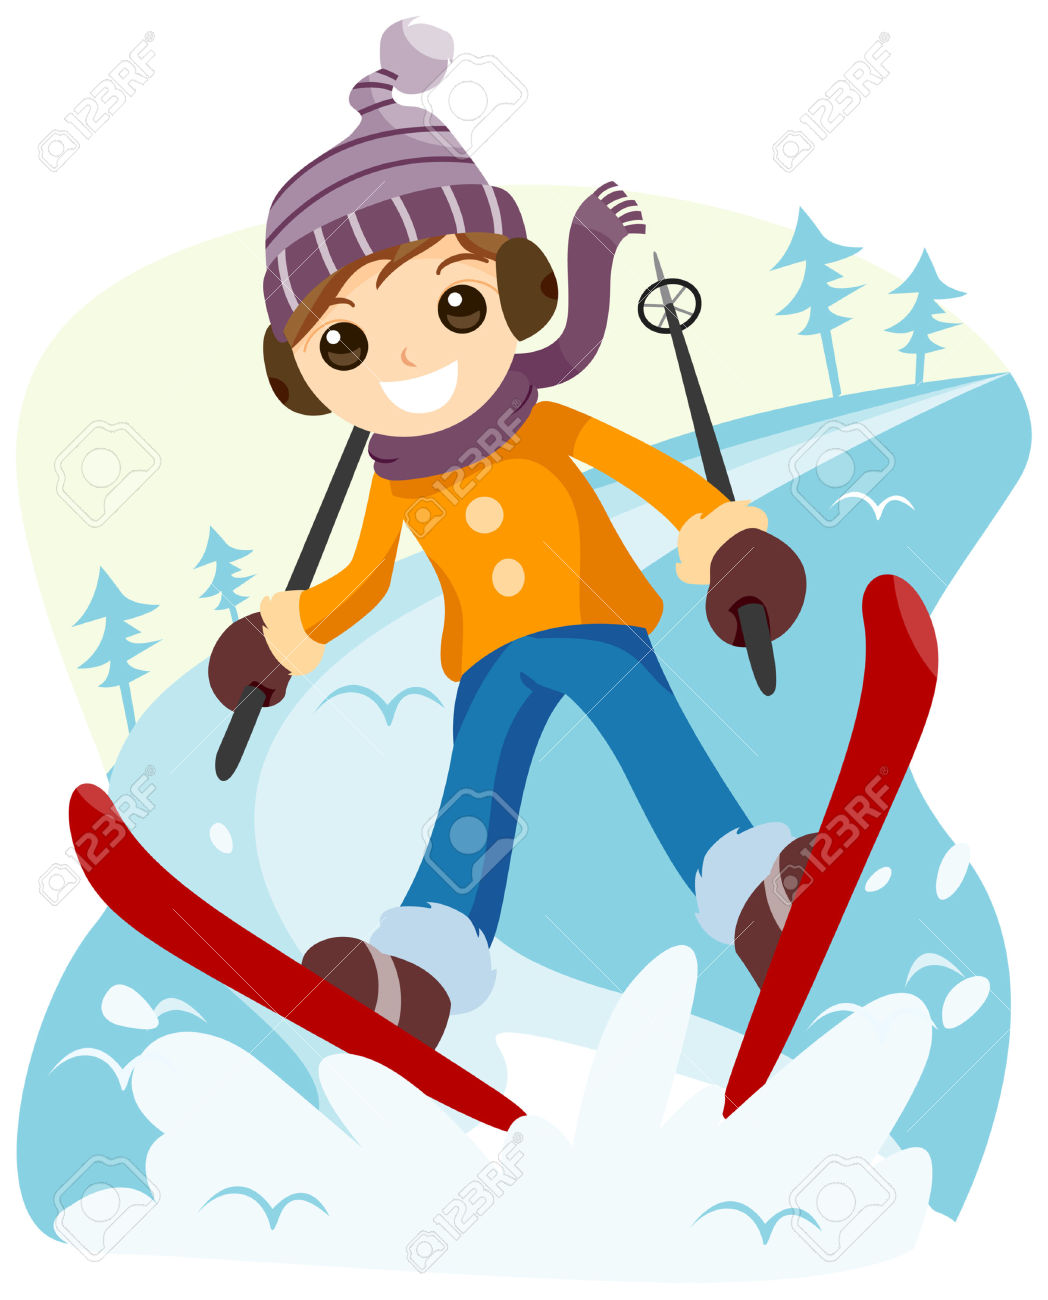 Skiing clipart - Clipground